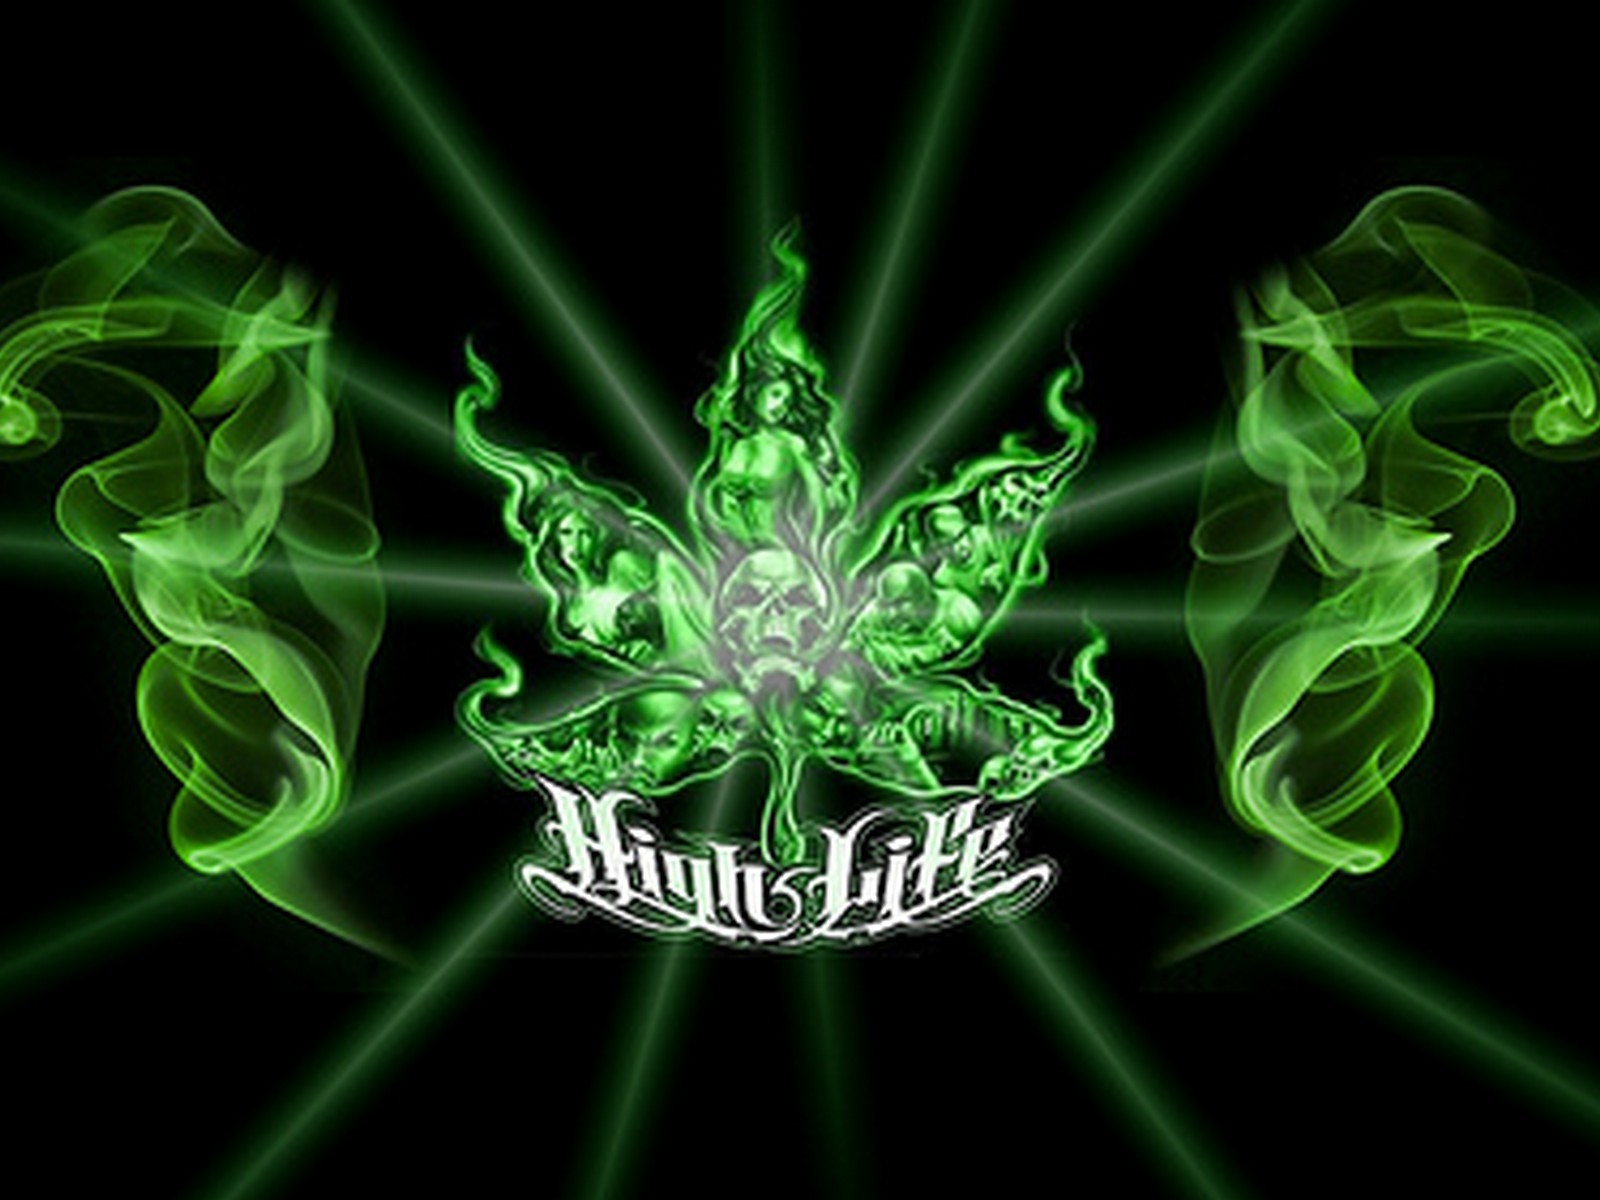 39+] Free Weed Wallpaper Download on